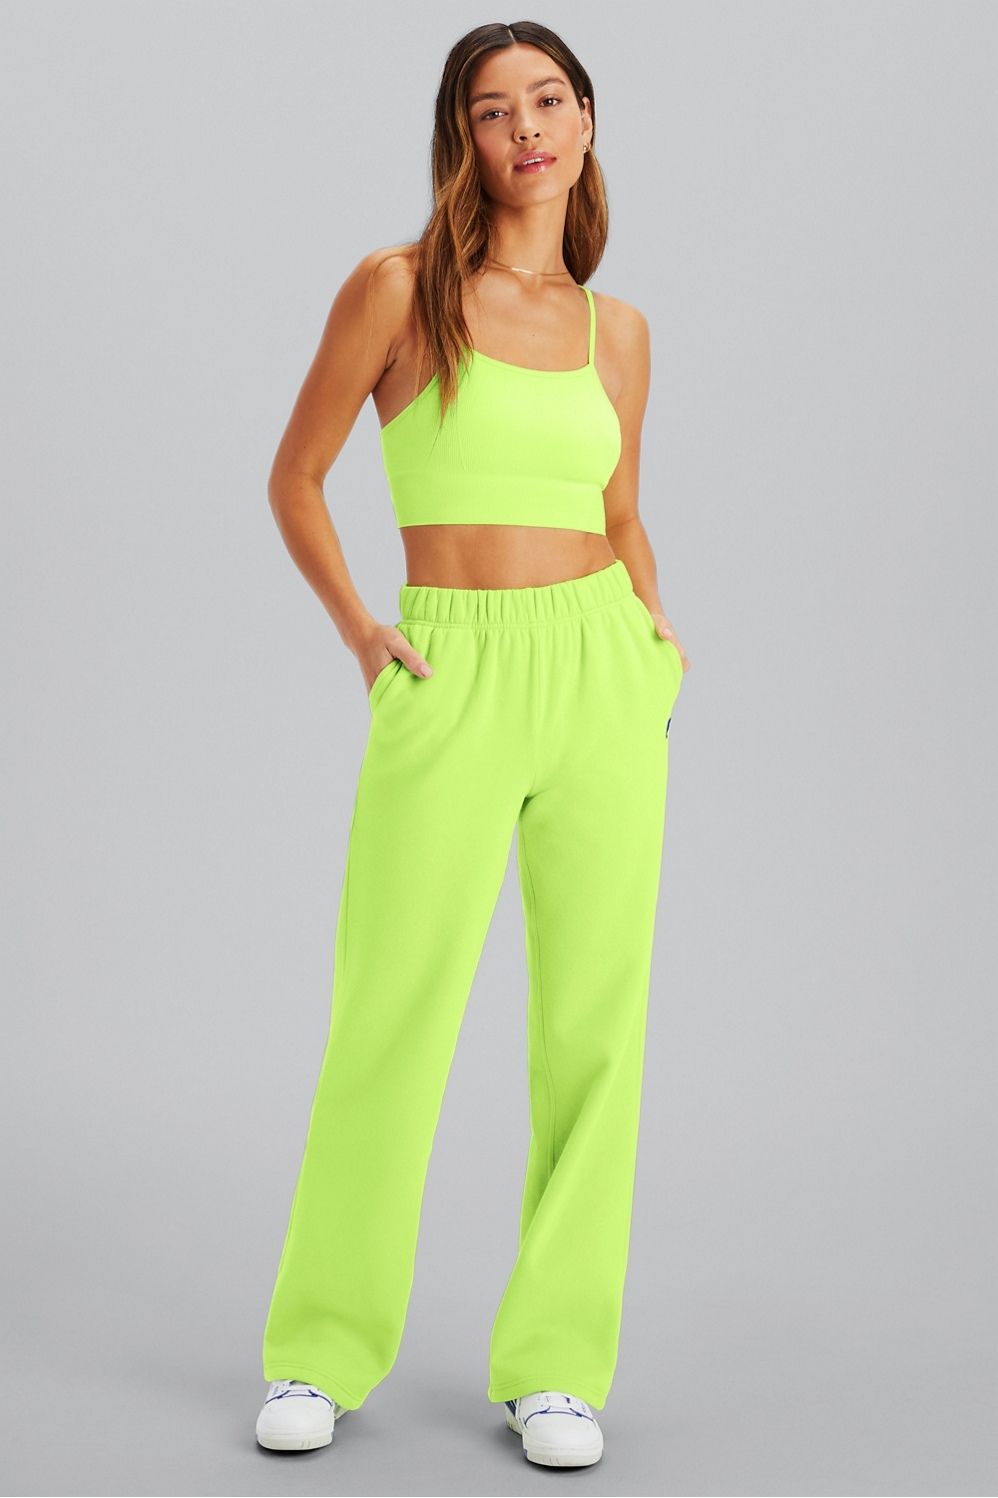 Sublime 2-Piece Outfit | Fabletics - North America